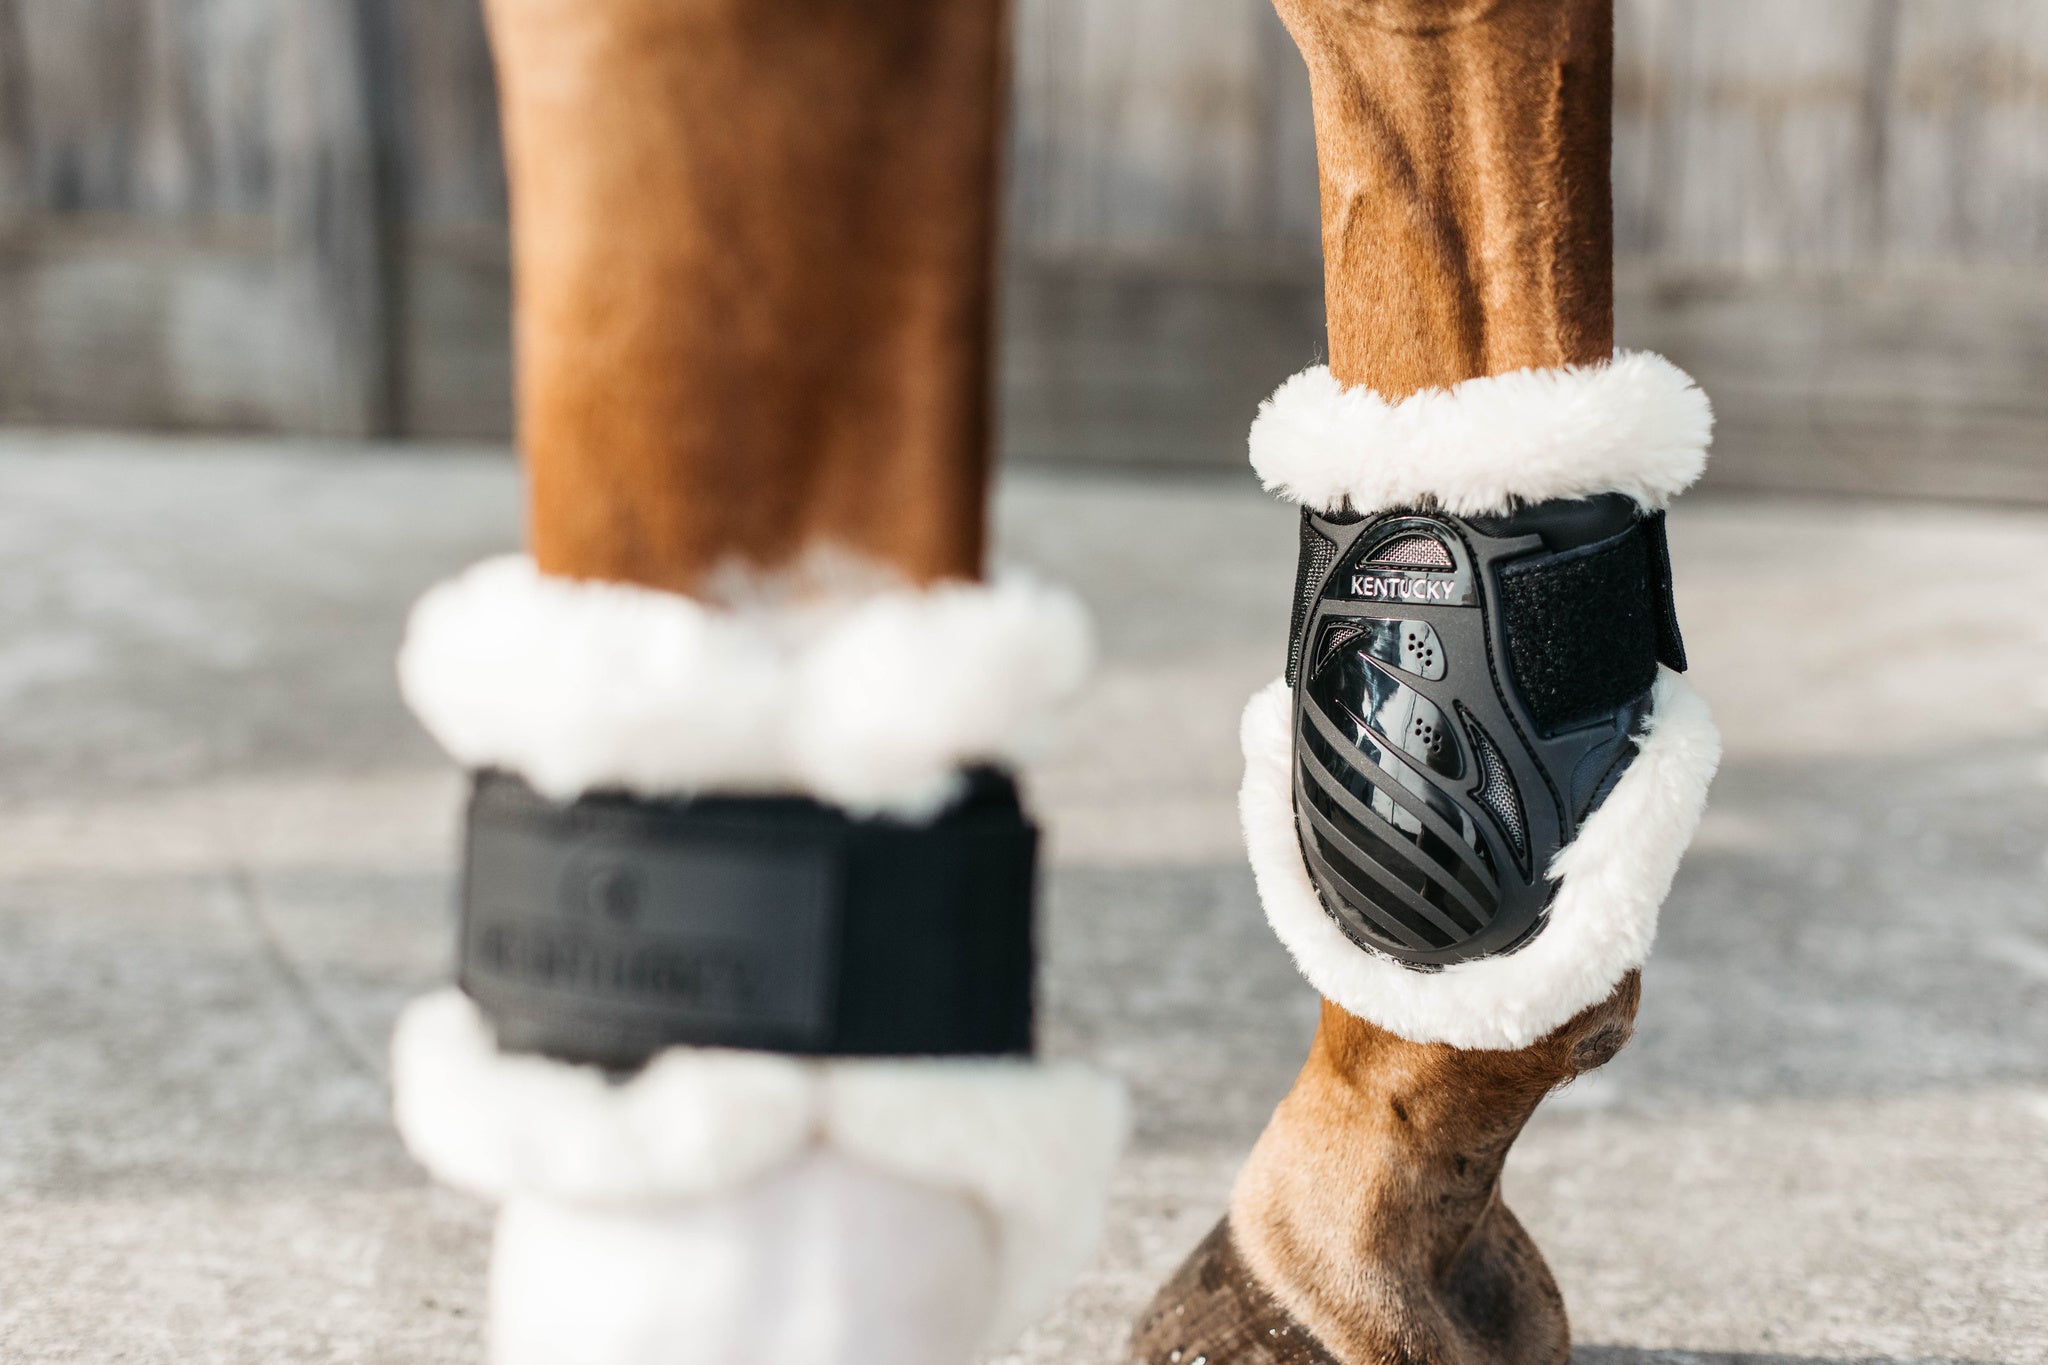 Kentucky Sheepskin Young Horse Fetlock Boots Air are the perfect match for the New Kentucky Tendon Boots Bamboo Shield. 